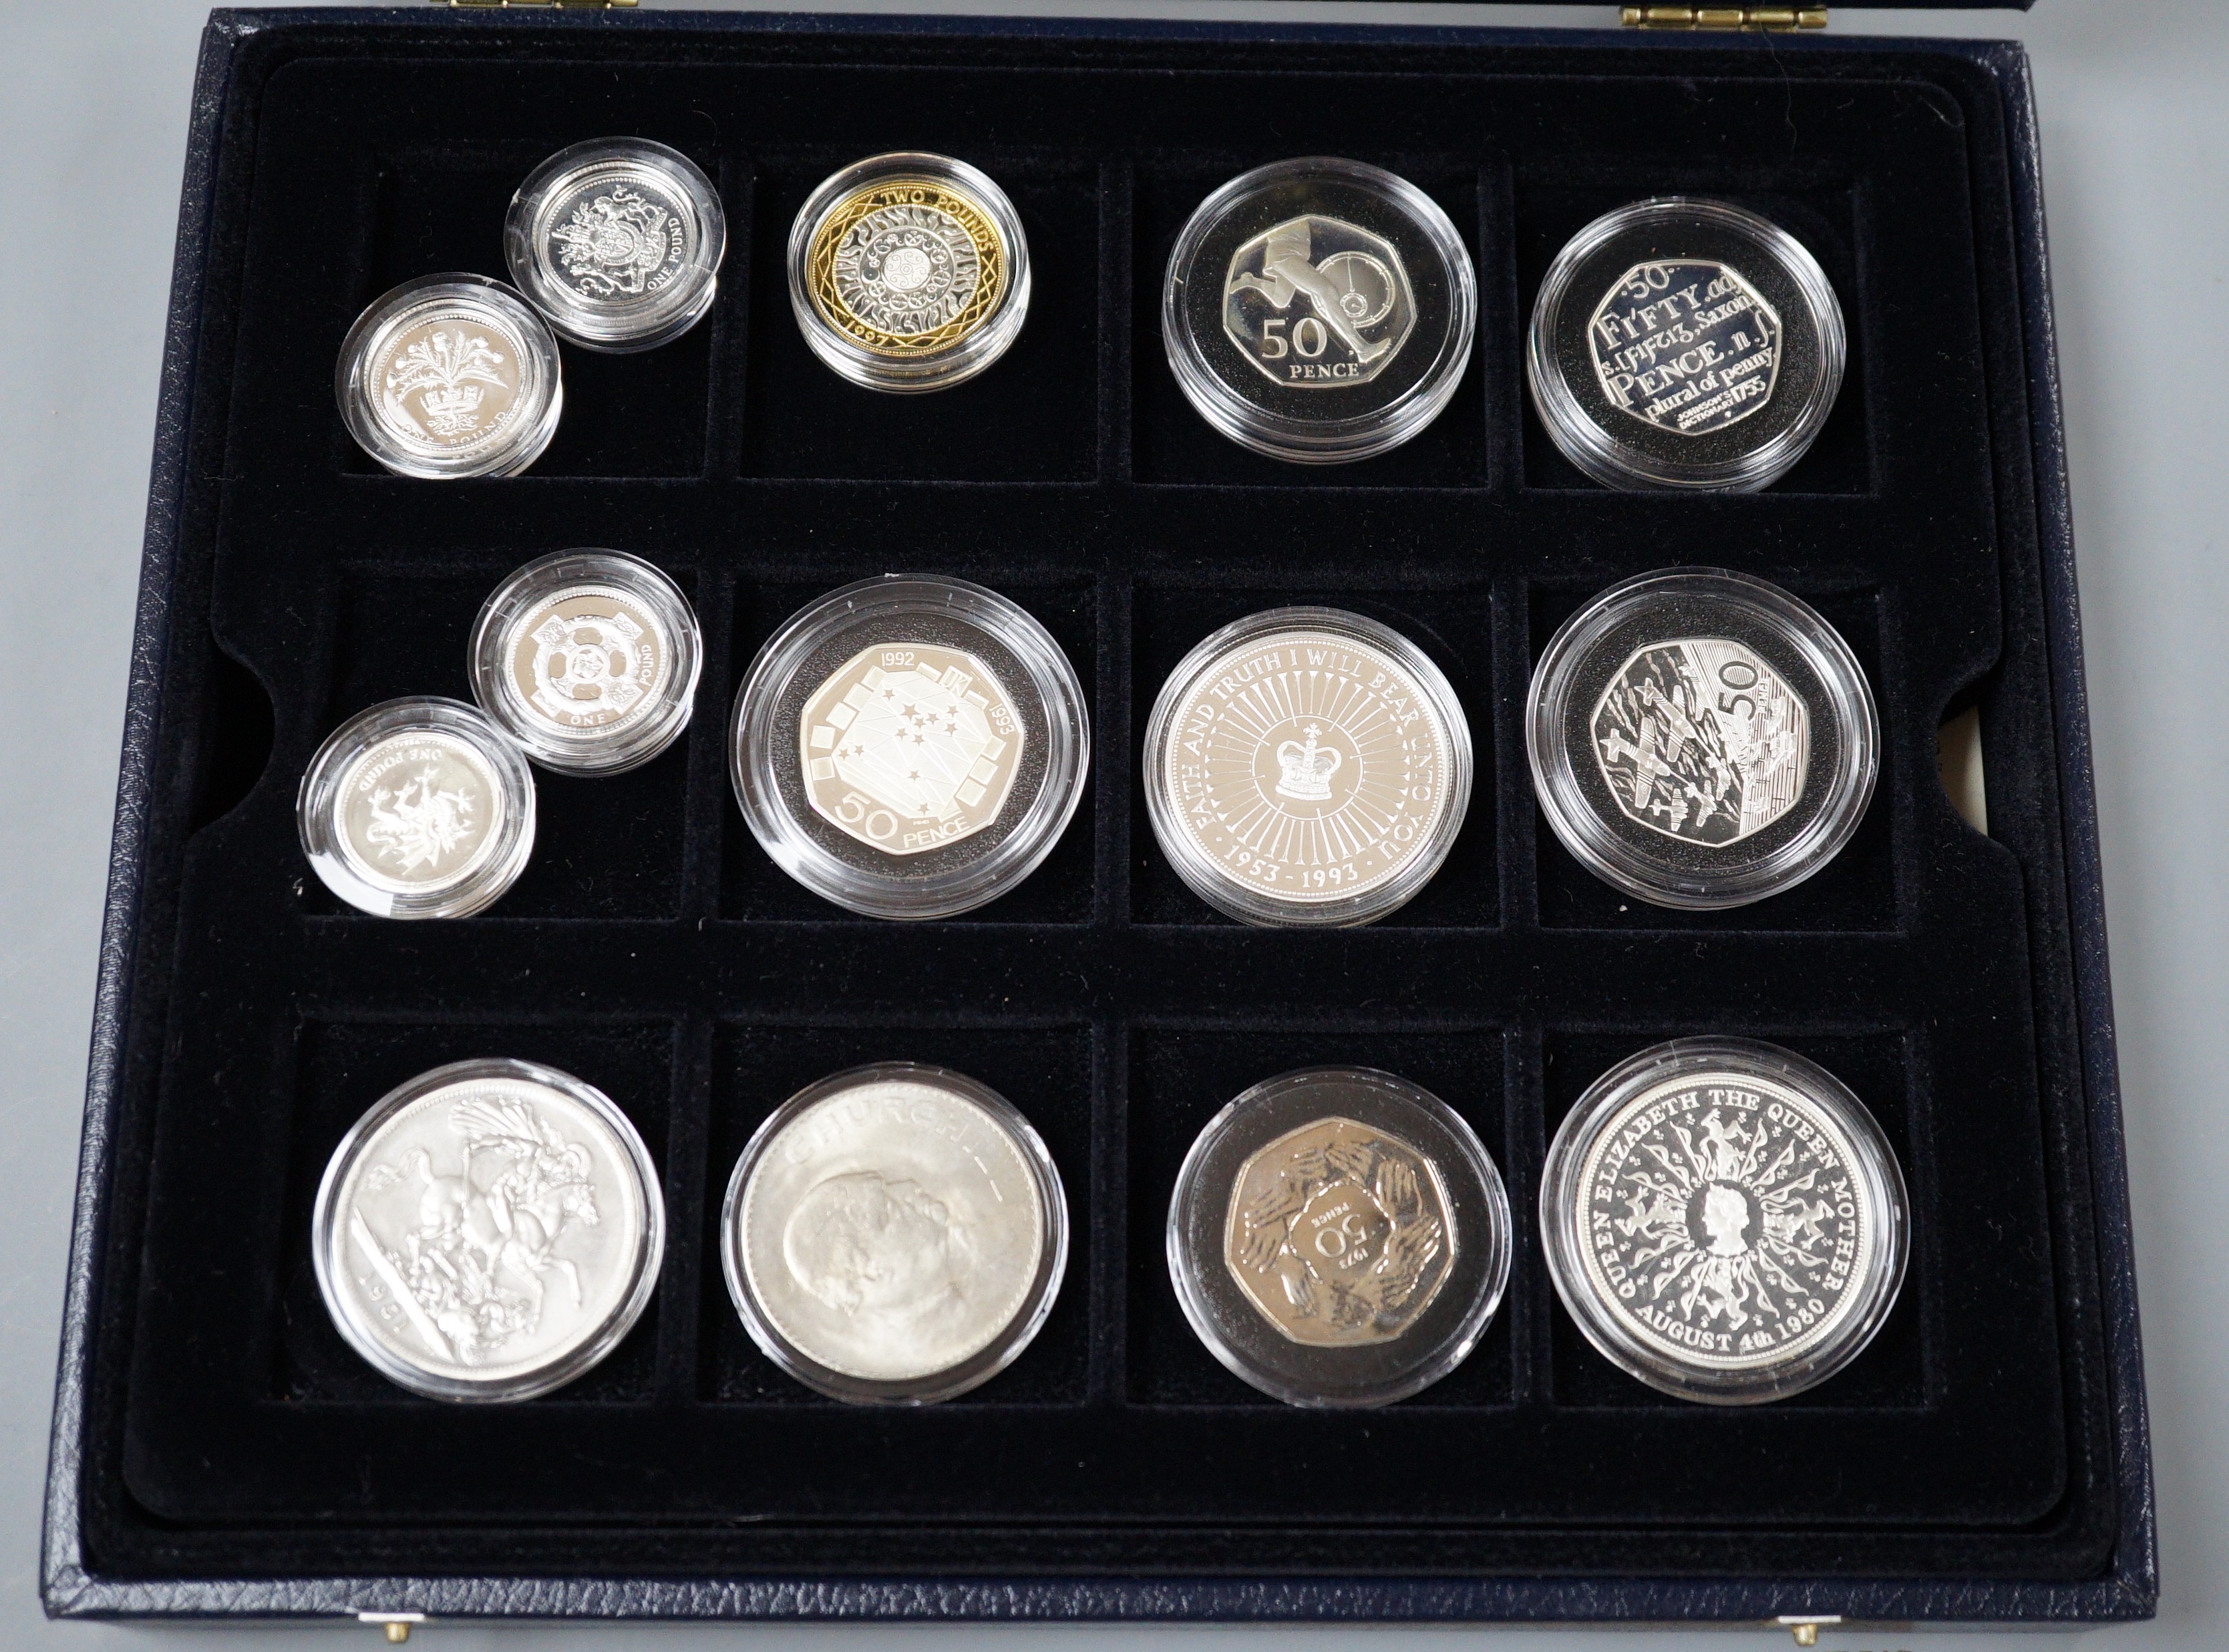 A group of Royal Mint UK commemorative silver proof coins, including 1996 Northern Ireland £1, 1983 royal arms £1, 1995 Welsh £1, 2005 Dictionary 250th anniversary coin, four minute mile 50p, 1997 £2, 50th anniversary D